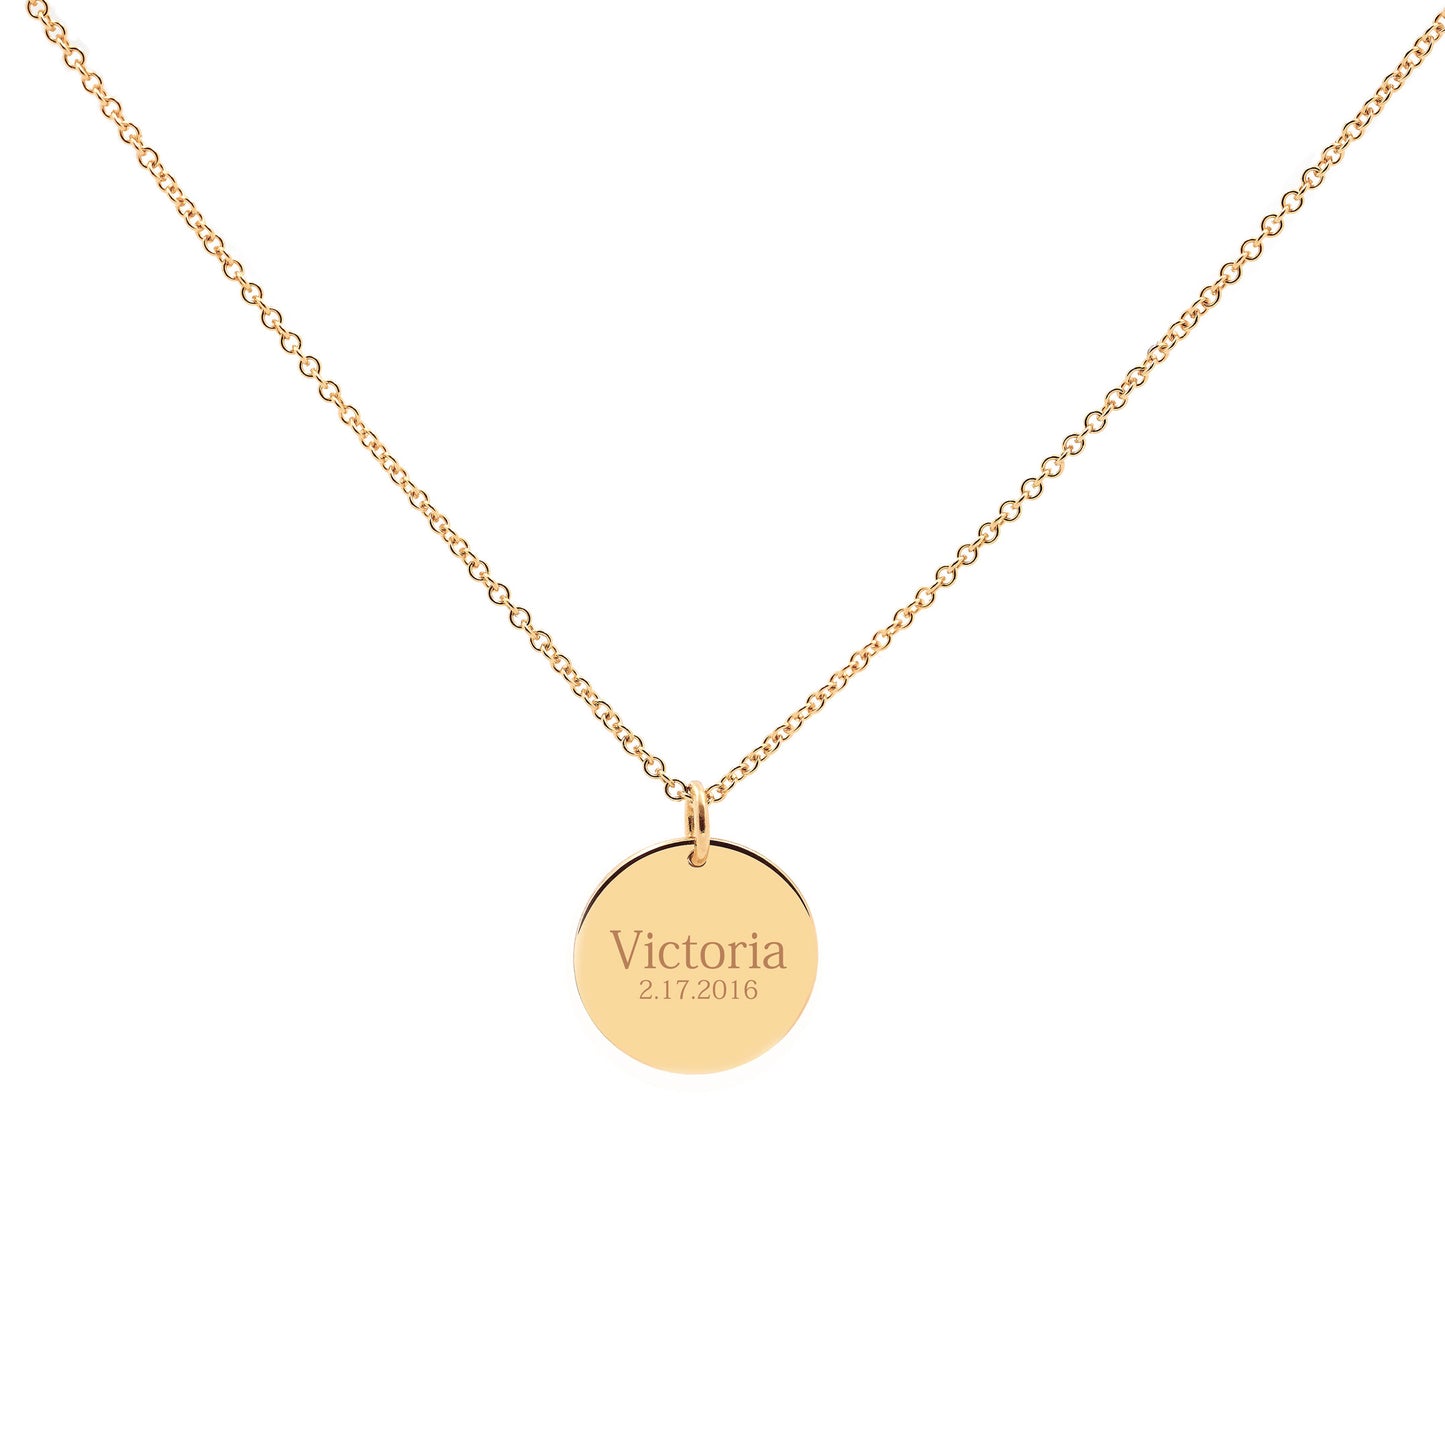 Handprint / Footprint Cable Chain Necklace in 14K Gold